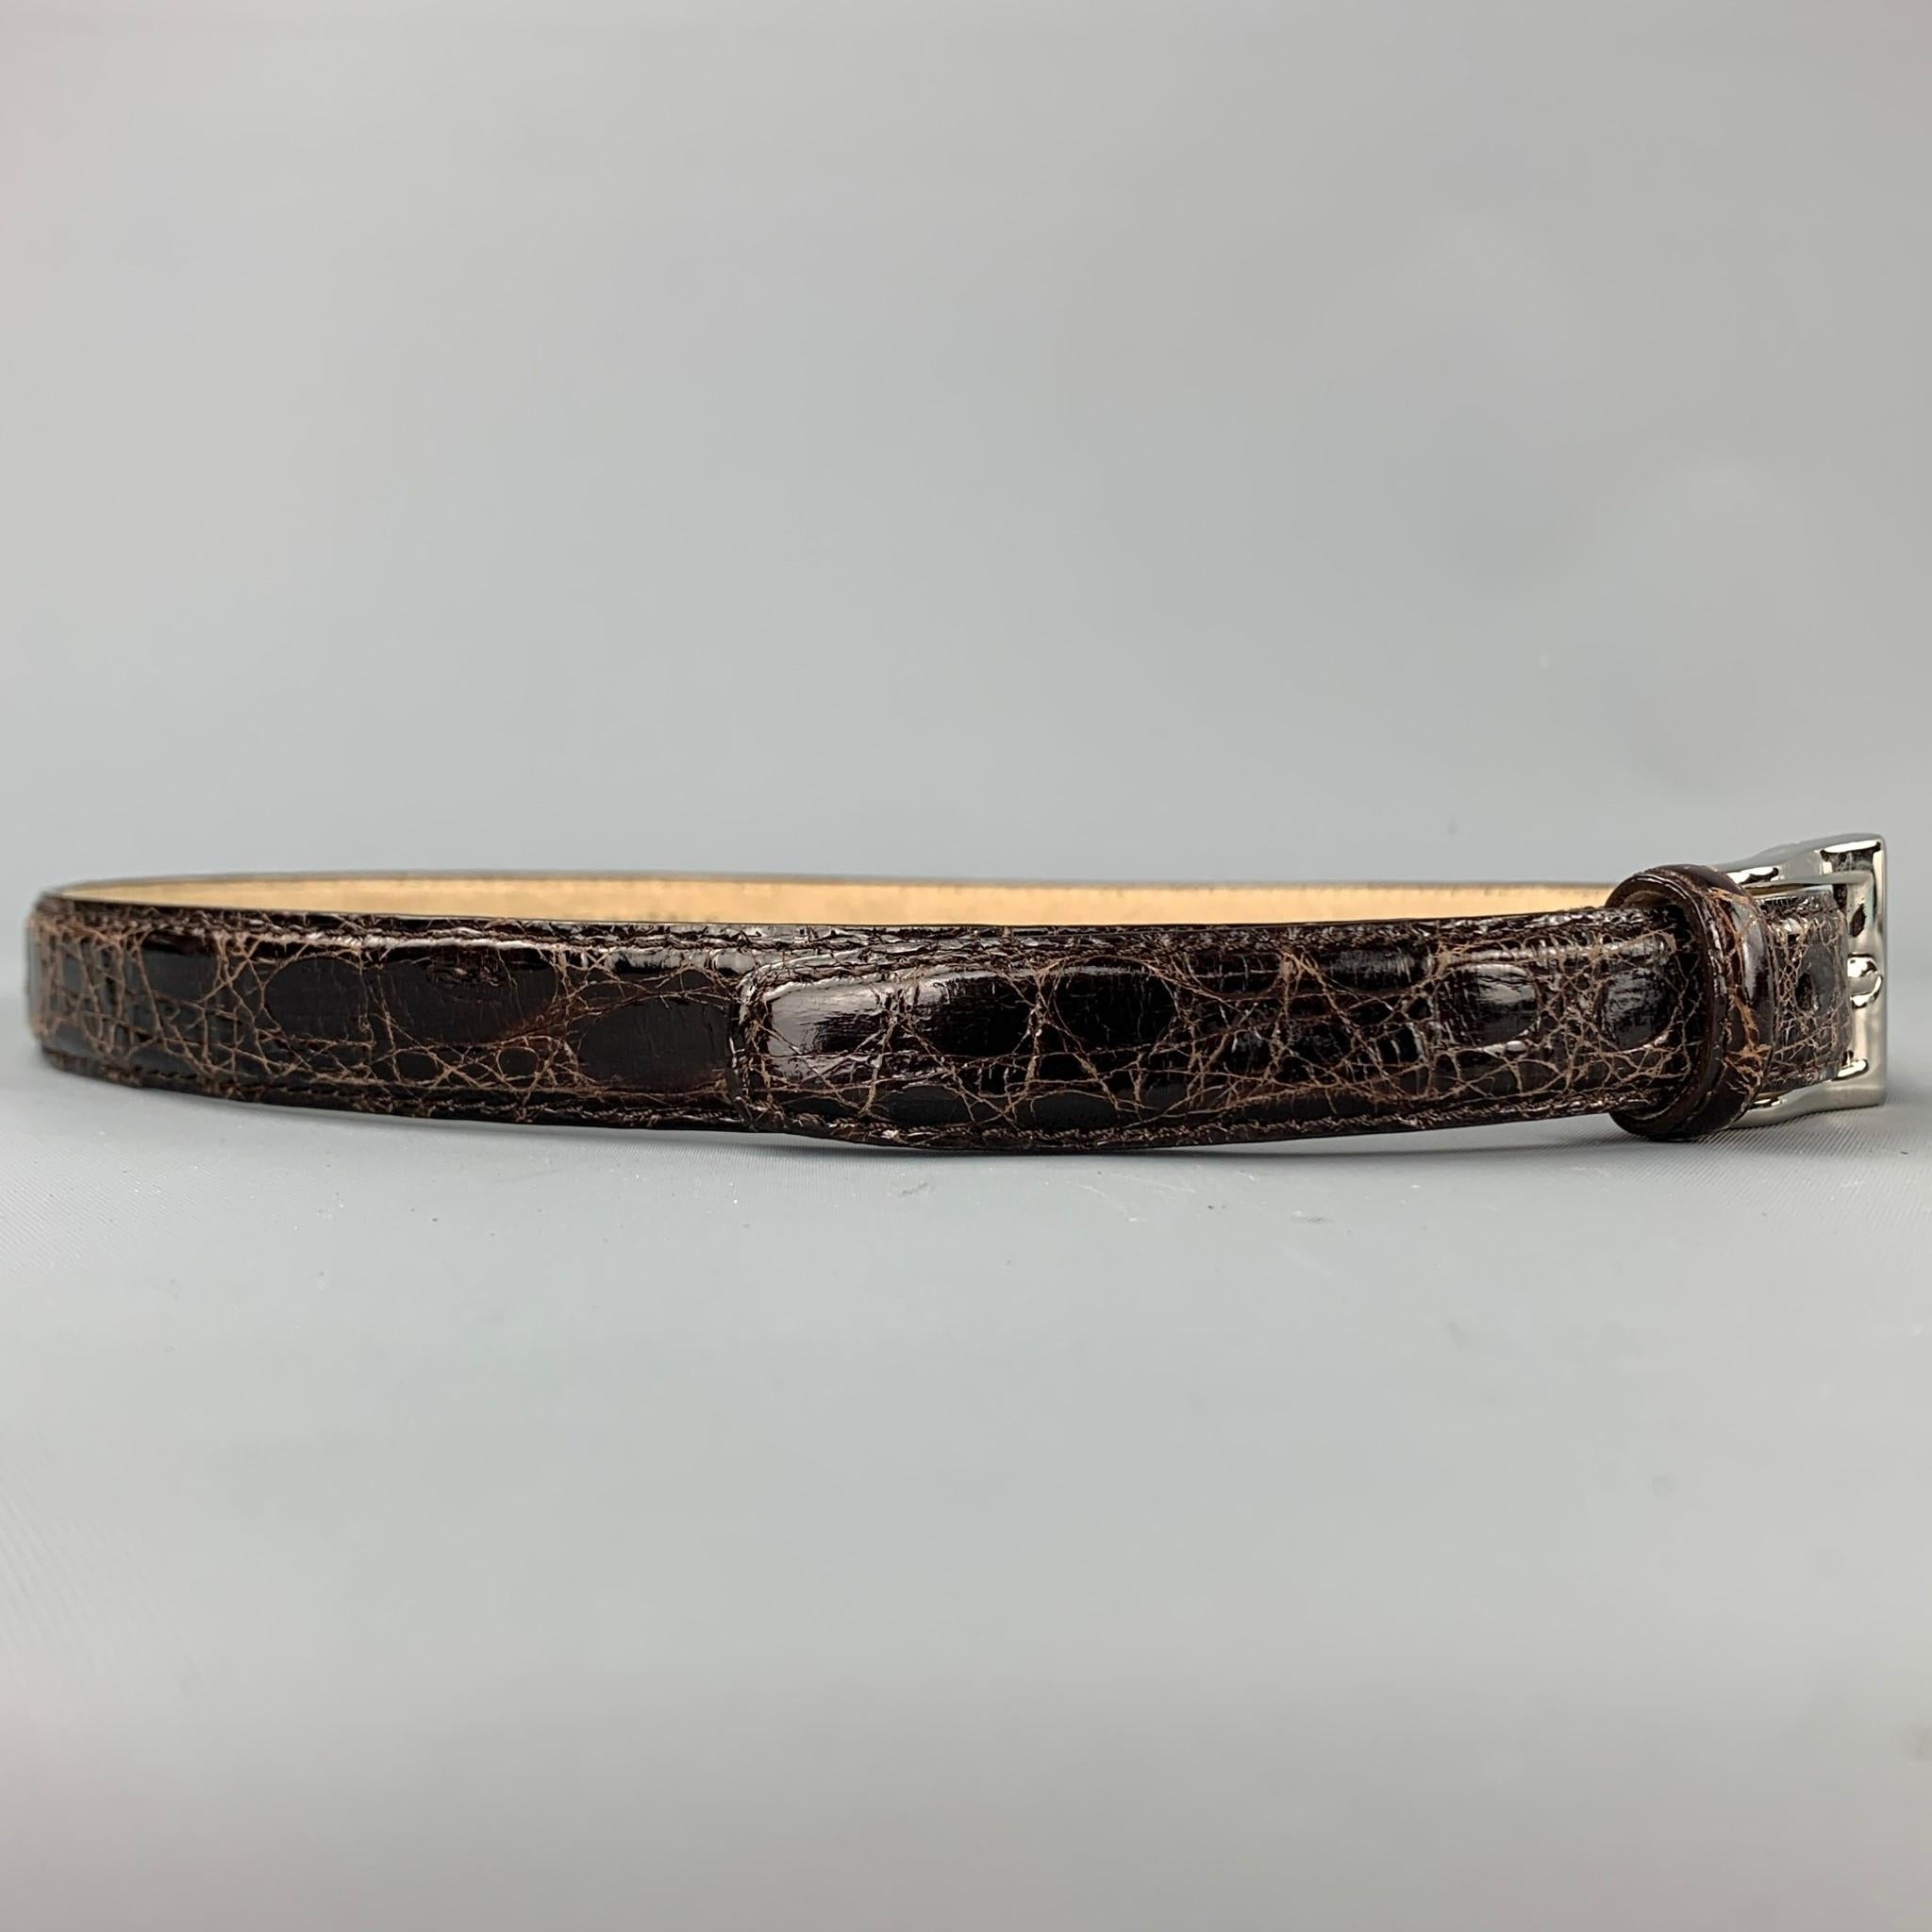 ANNA FIRENZE belt comes in a olive alligator leather featuring a skinny style and a silver tone buckle. Made in Italy.

Very Good Pre-Owned Condition.
Marked: 85/70

Length: 33.5 in.
Width: 1 in.
Fits: 24 in. - 28 in.
Buckle: 1.5 in. 